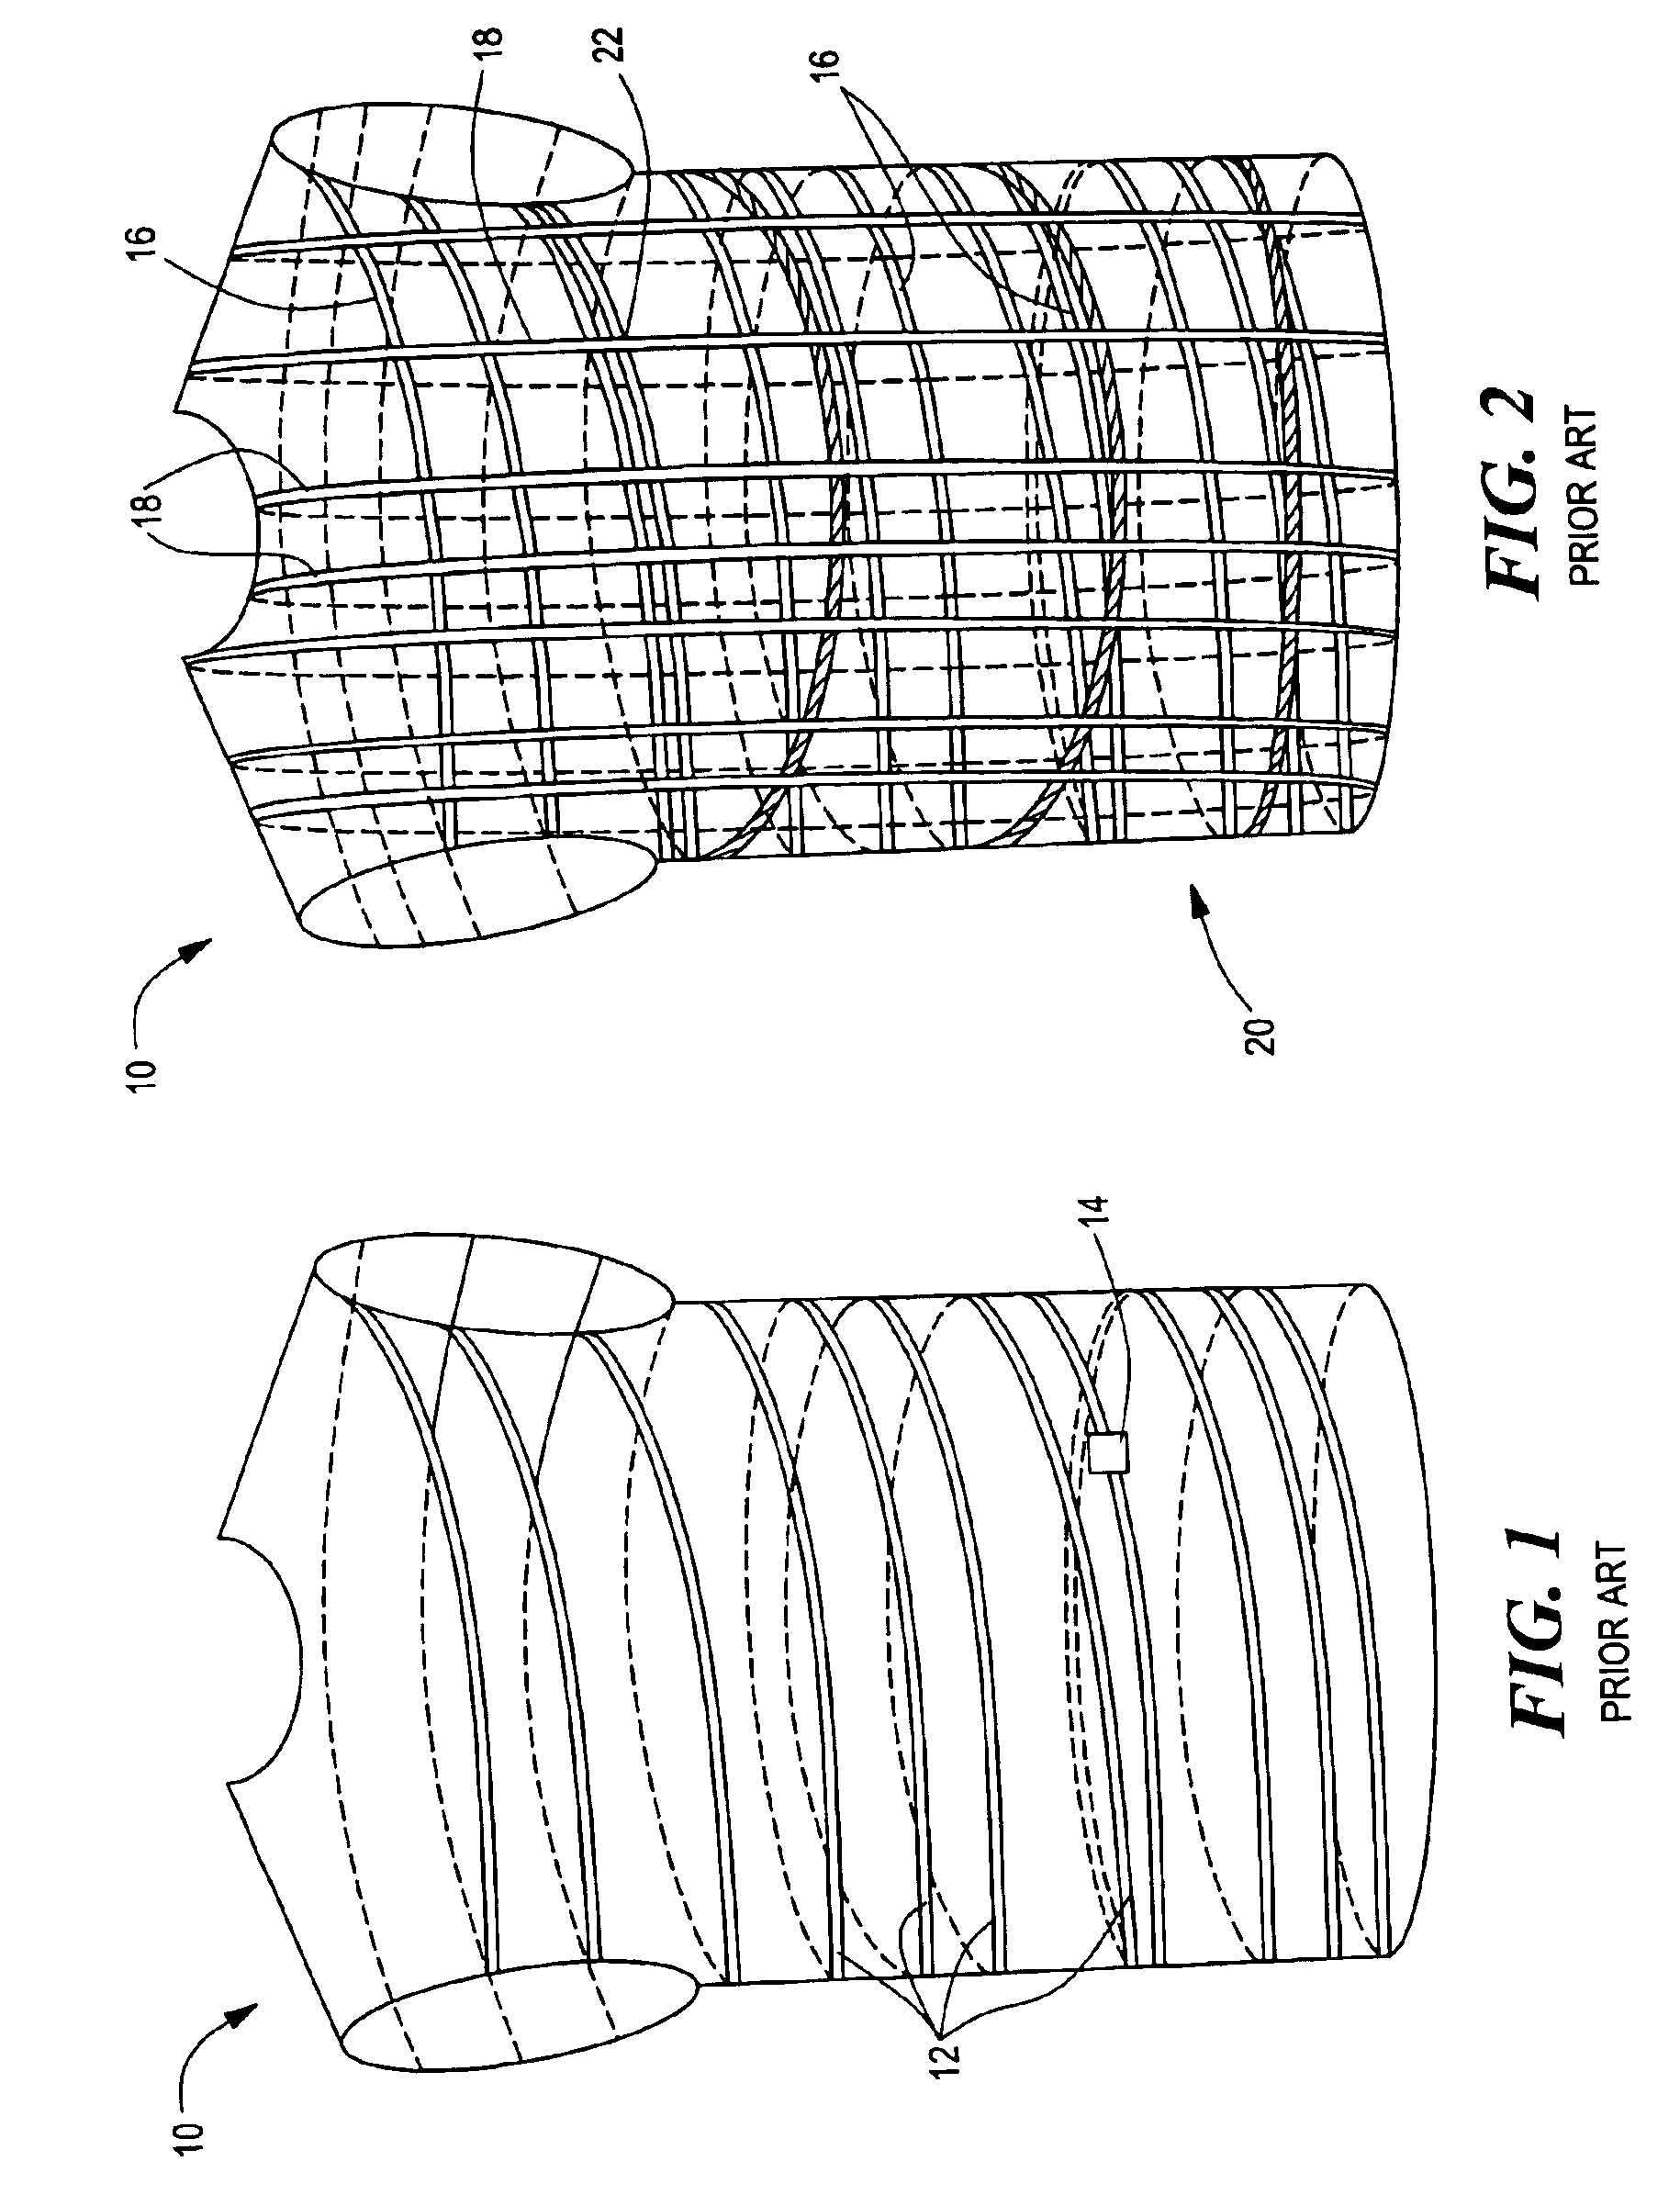 Tubular knit fabric and system